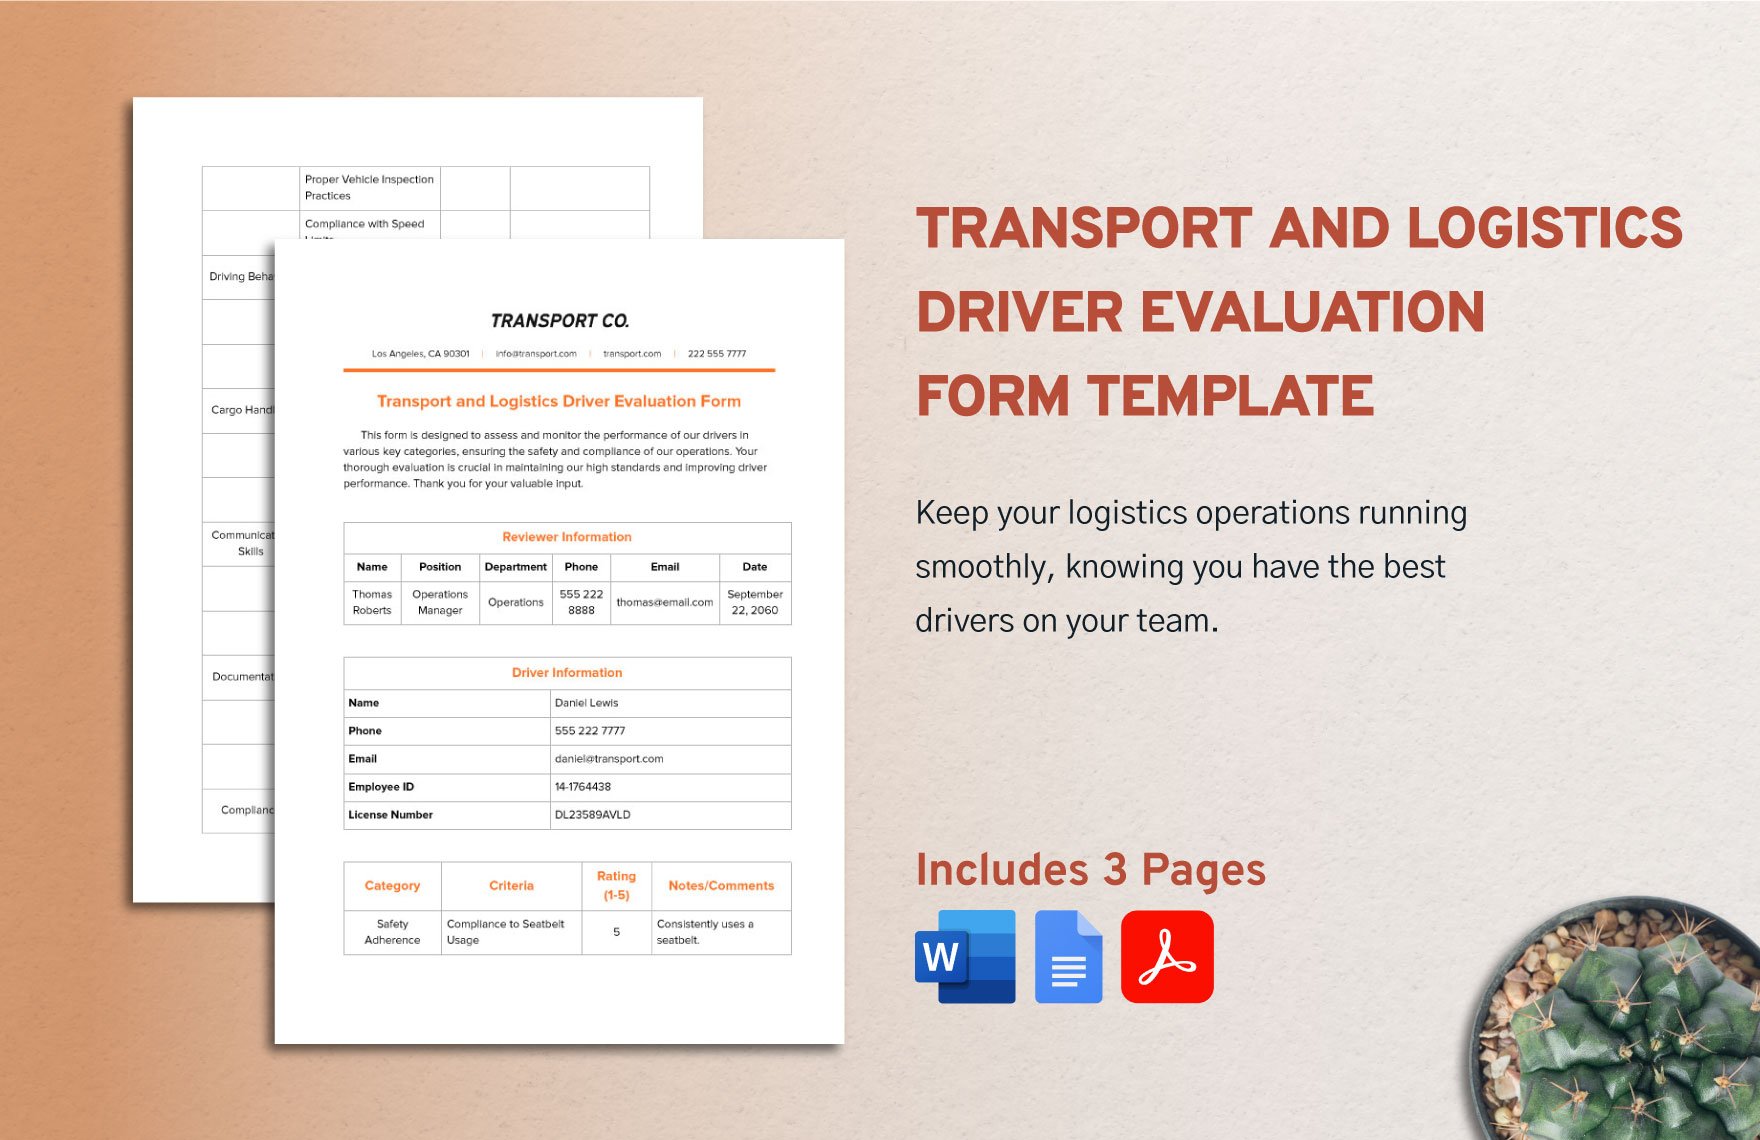 Transport and Logistics Driver Evaluation Form Template